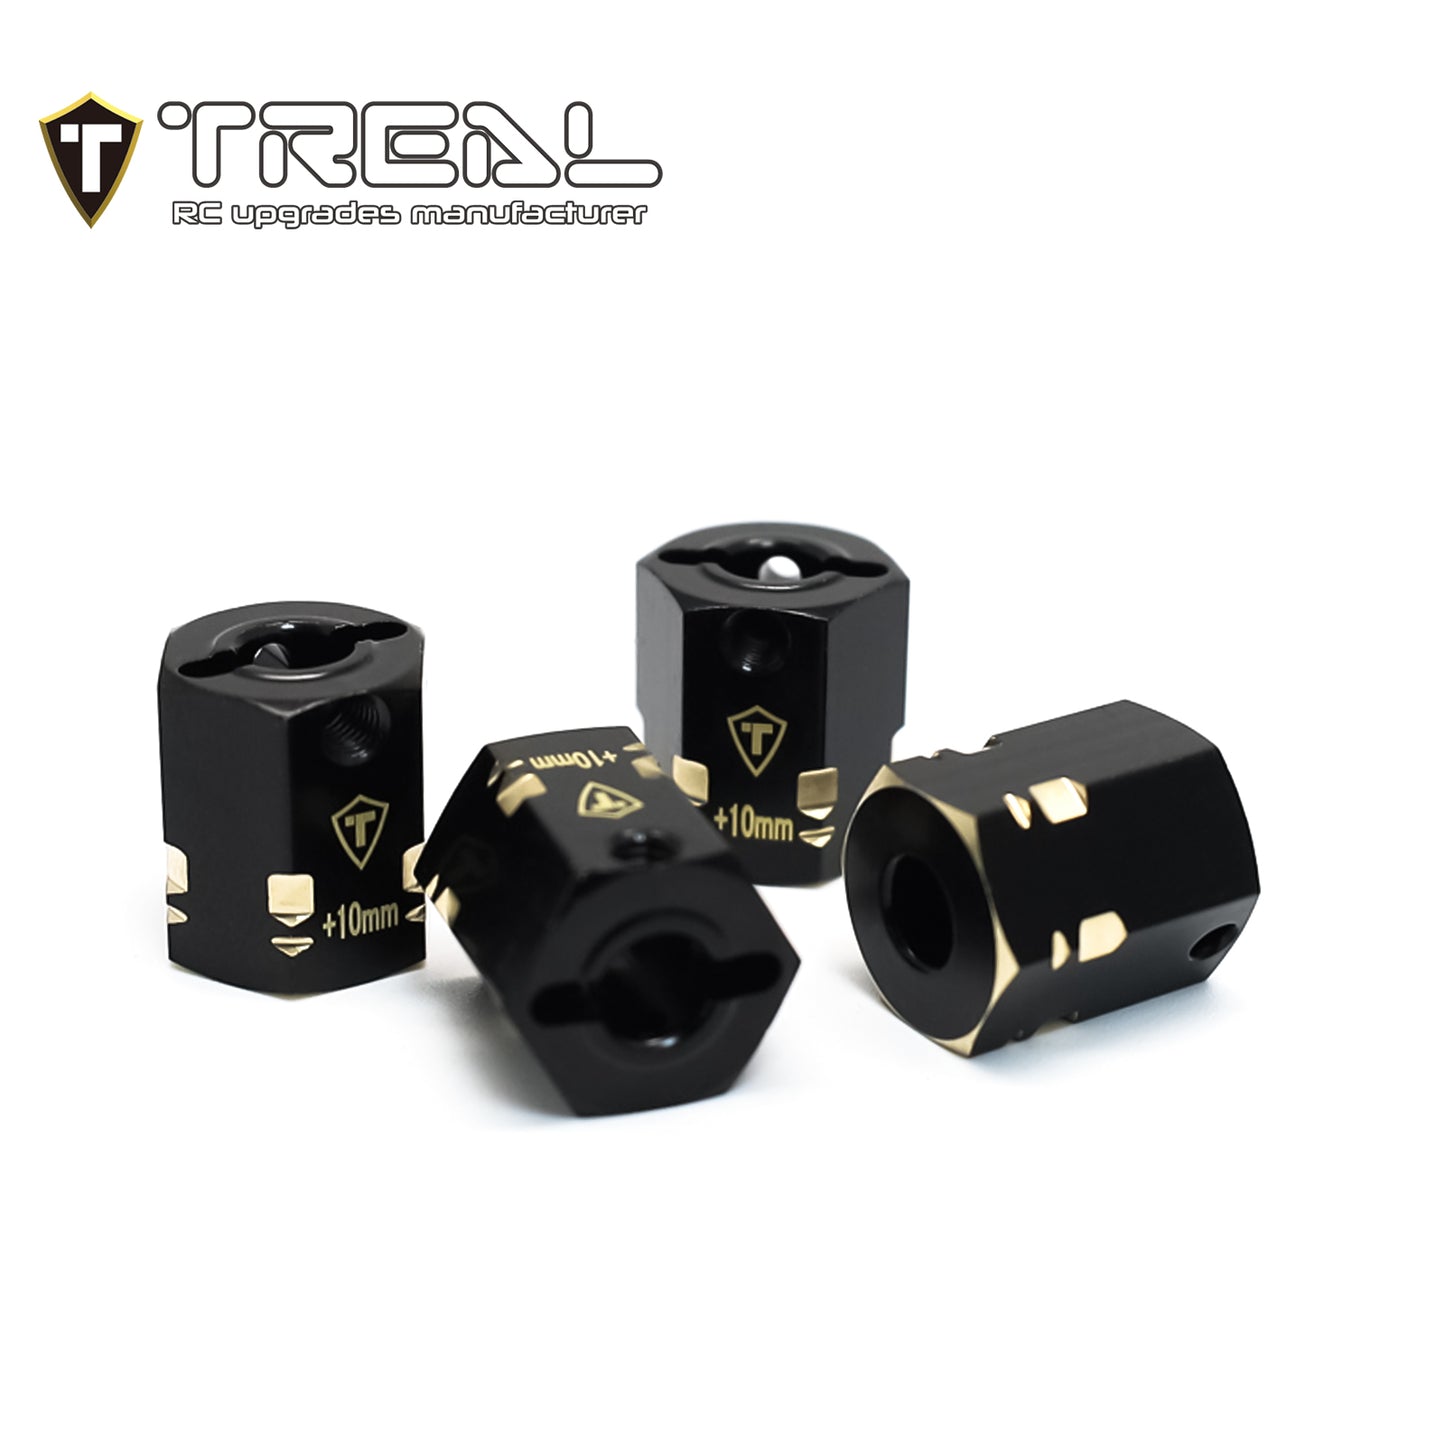 TREAL Brass 12mm Wheel Hex Adapters Extended(4pcs) for 1/10 RC Crawler Axial SCX10 PRO SCX10 III, SCX10 II ,Capra (Height:15mm)